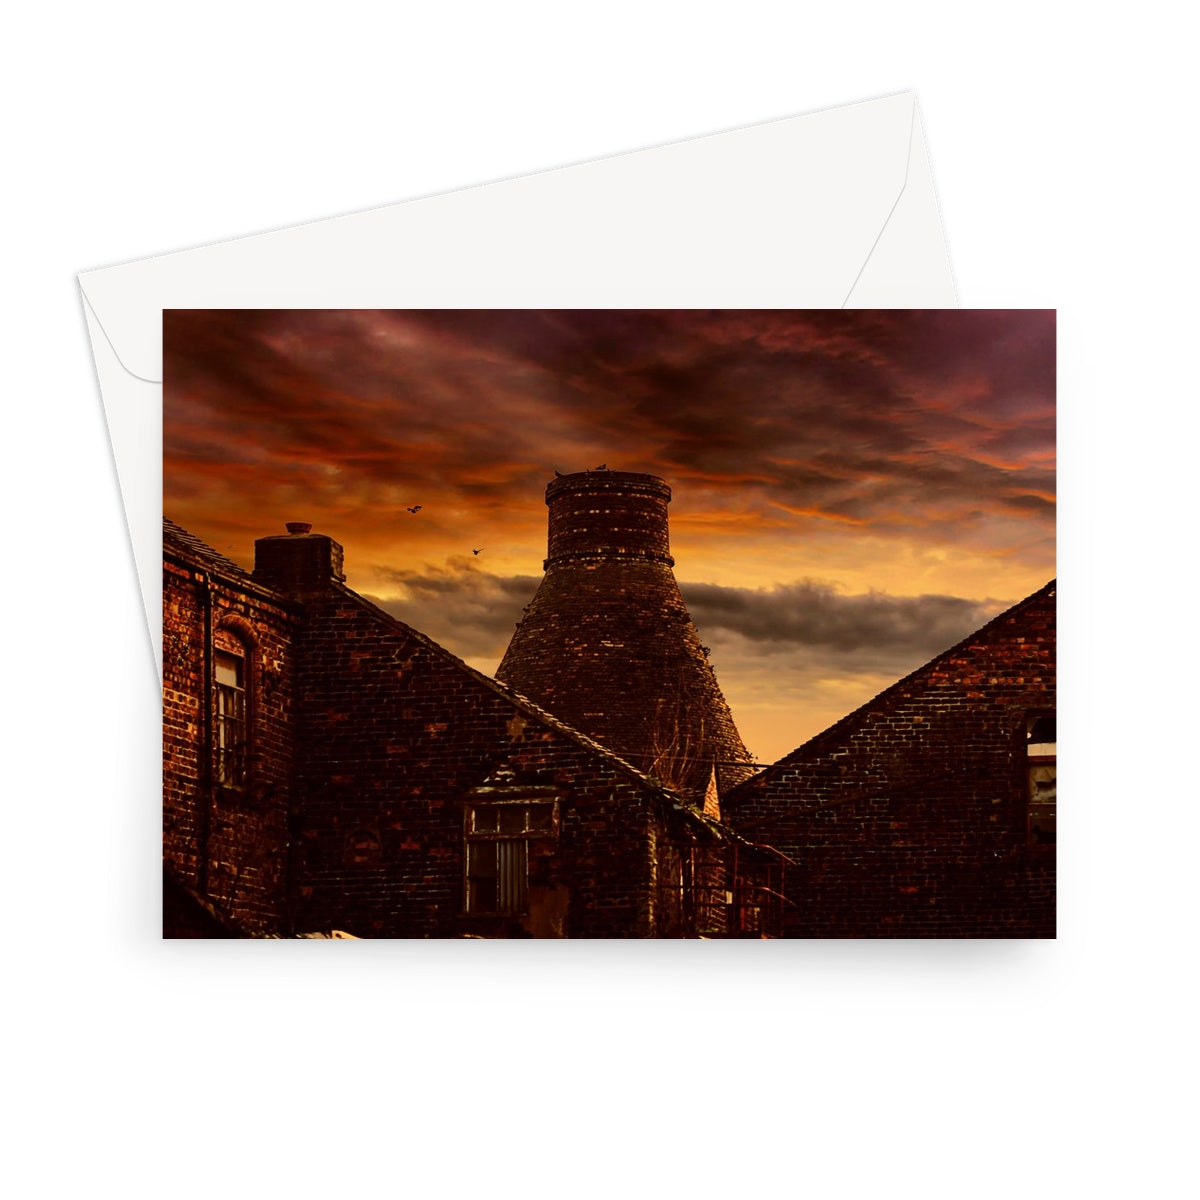 A Potteries Sunset Greeting Card